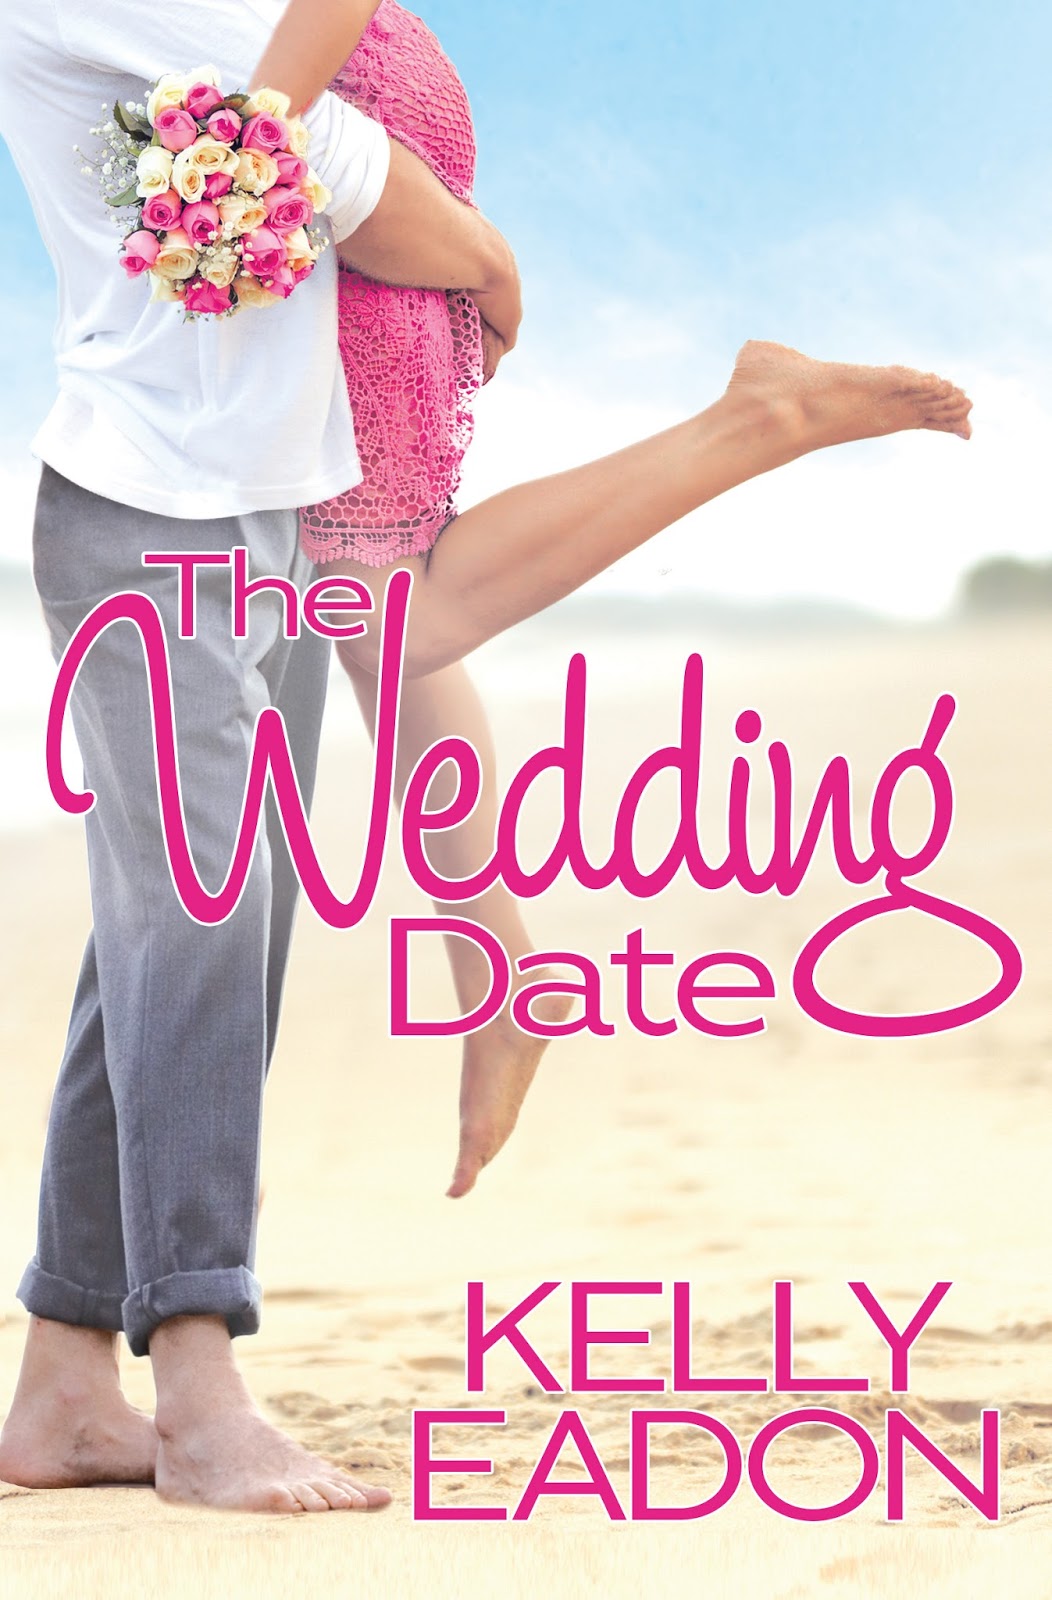 Category The-wedding-date-by-kelly-eadon-release-blitz photo photo